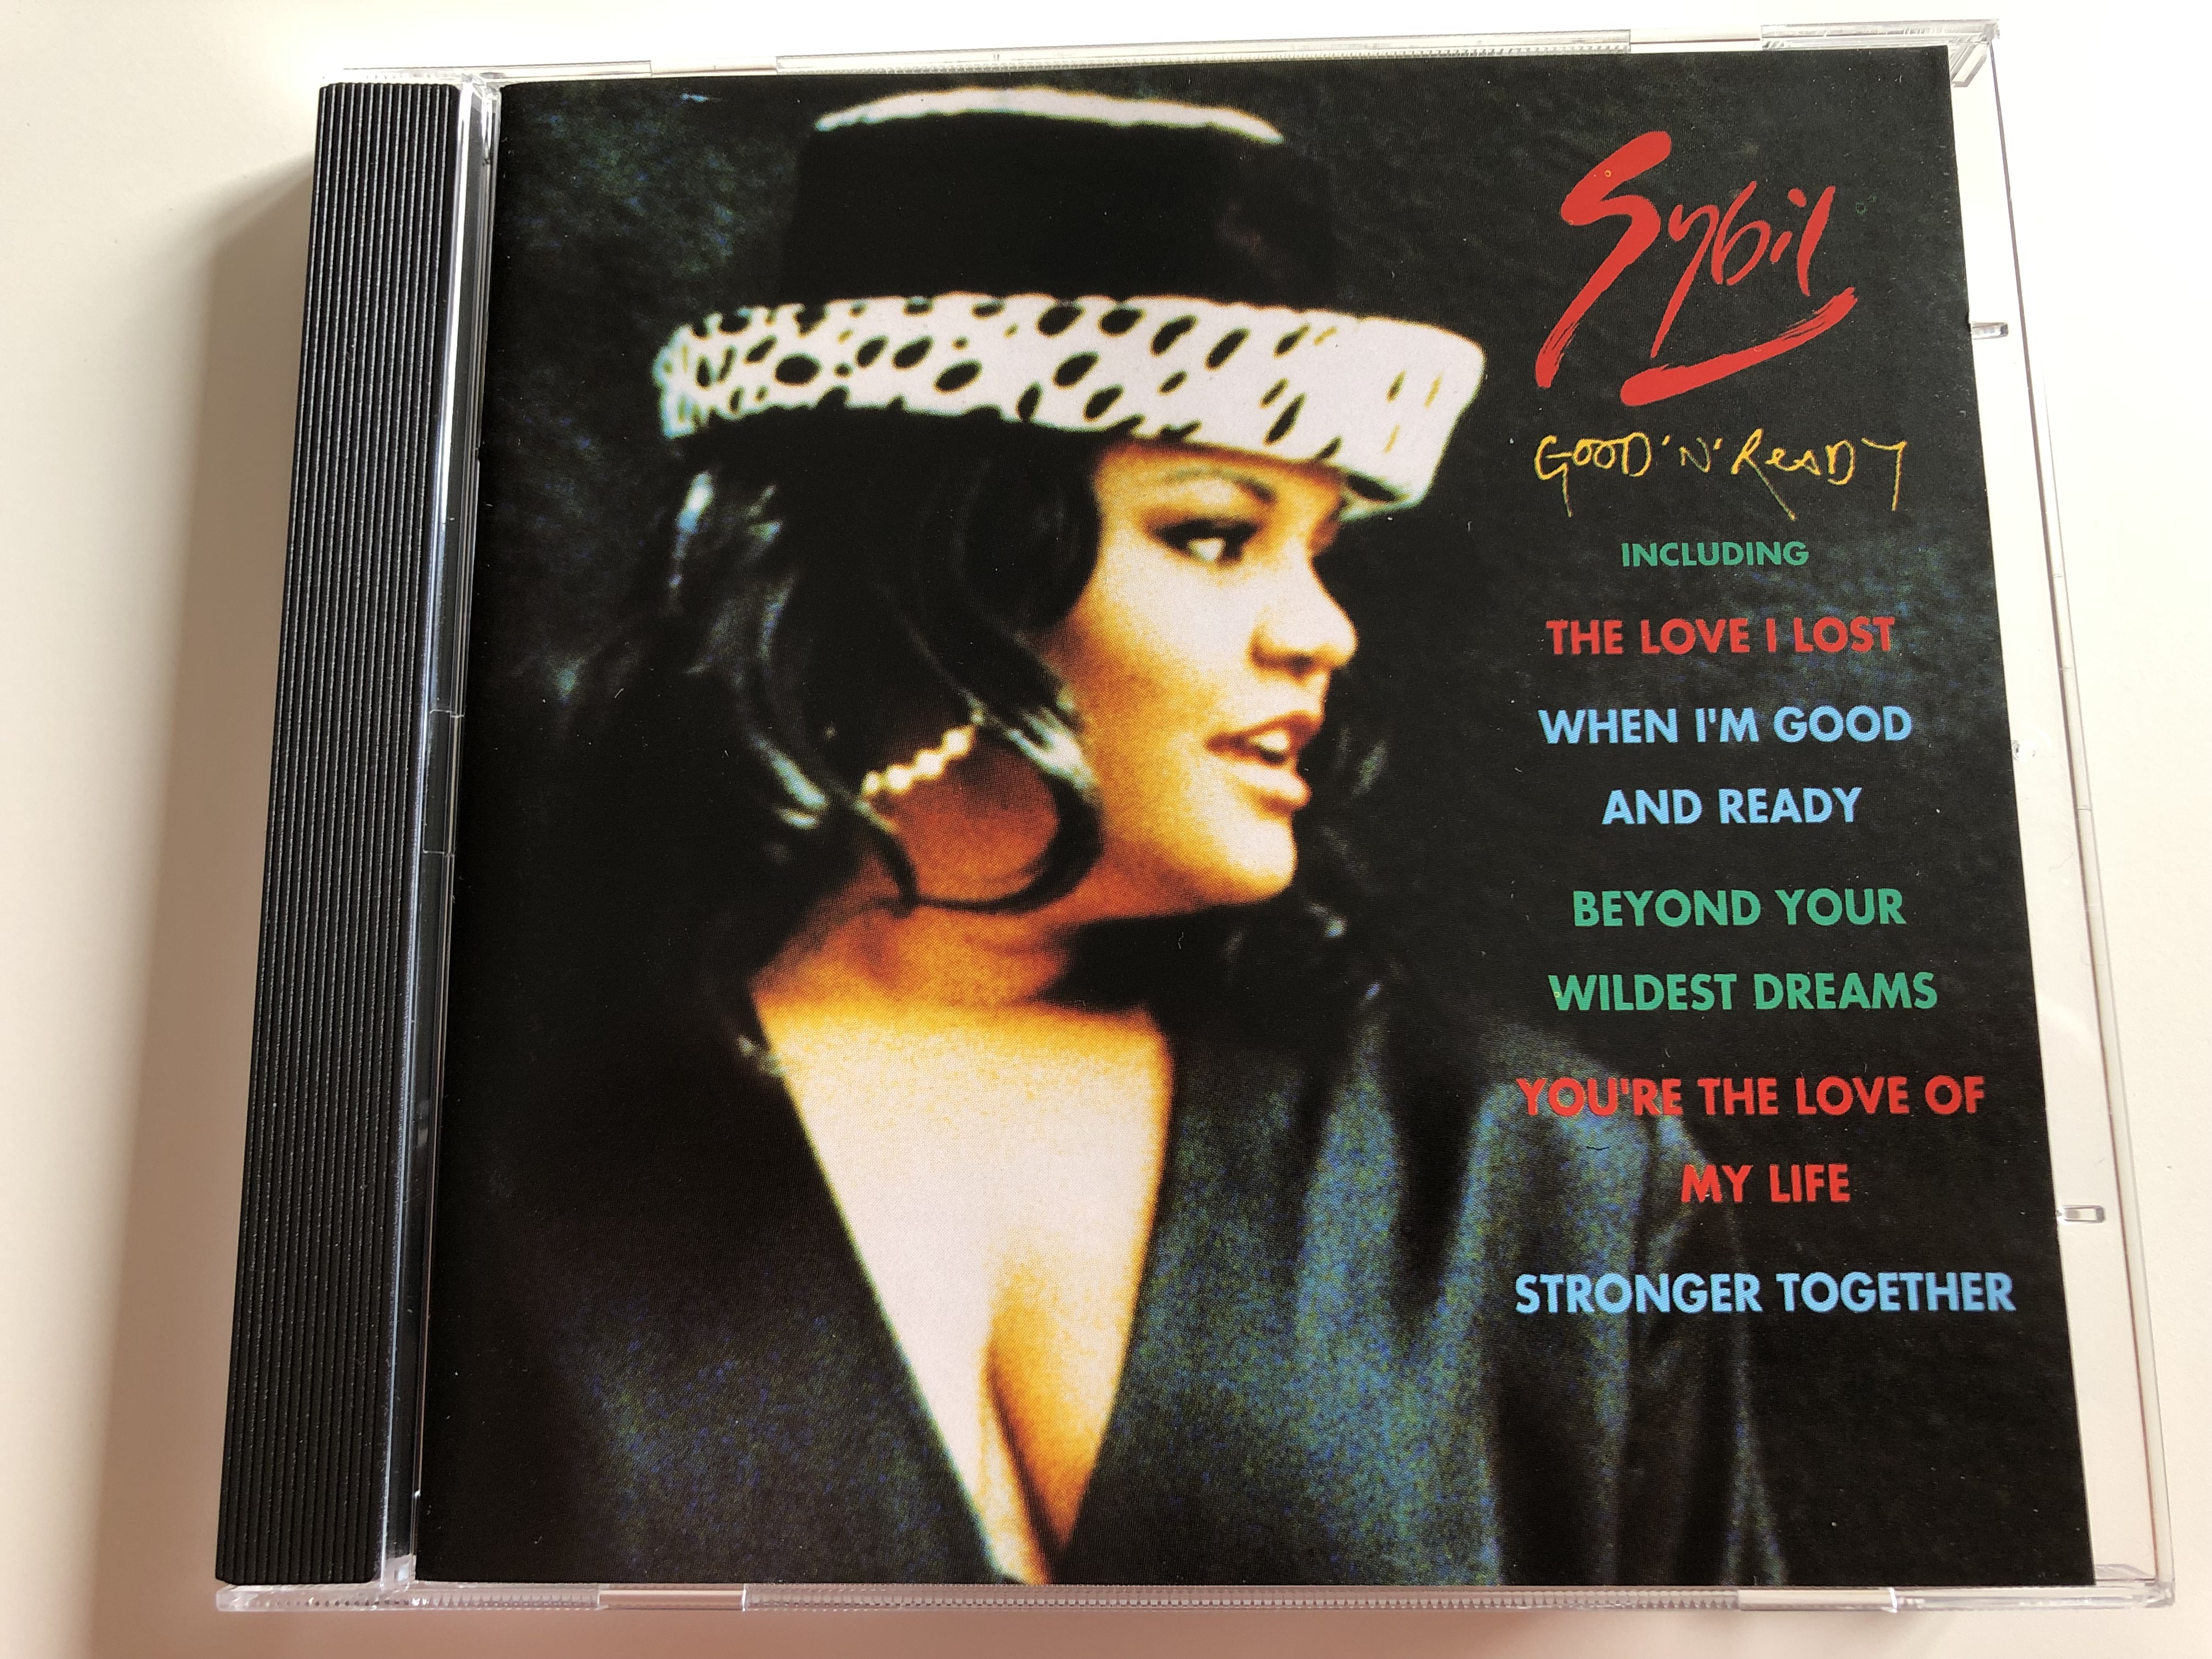 sybil-good-n-ready-the-love-i-lost-when-i-m-good-and-ready-beyond-your-wildest-dreams-you-re-the-love-of-my-life-stronger-together-next-plateau-records-inc.-audio-cd-1993-828-429-2-1-.jpg